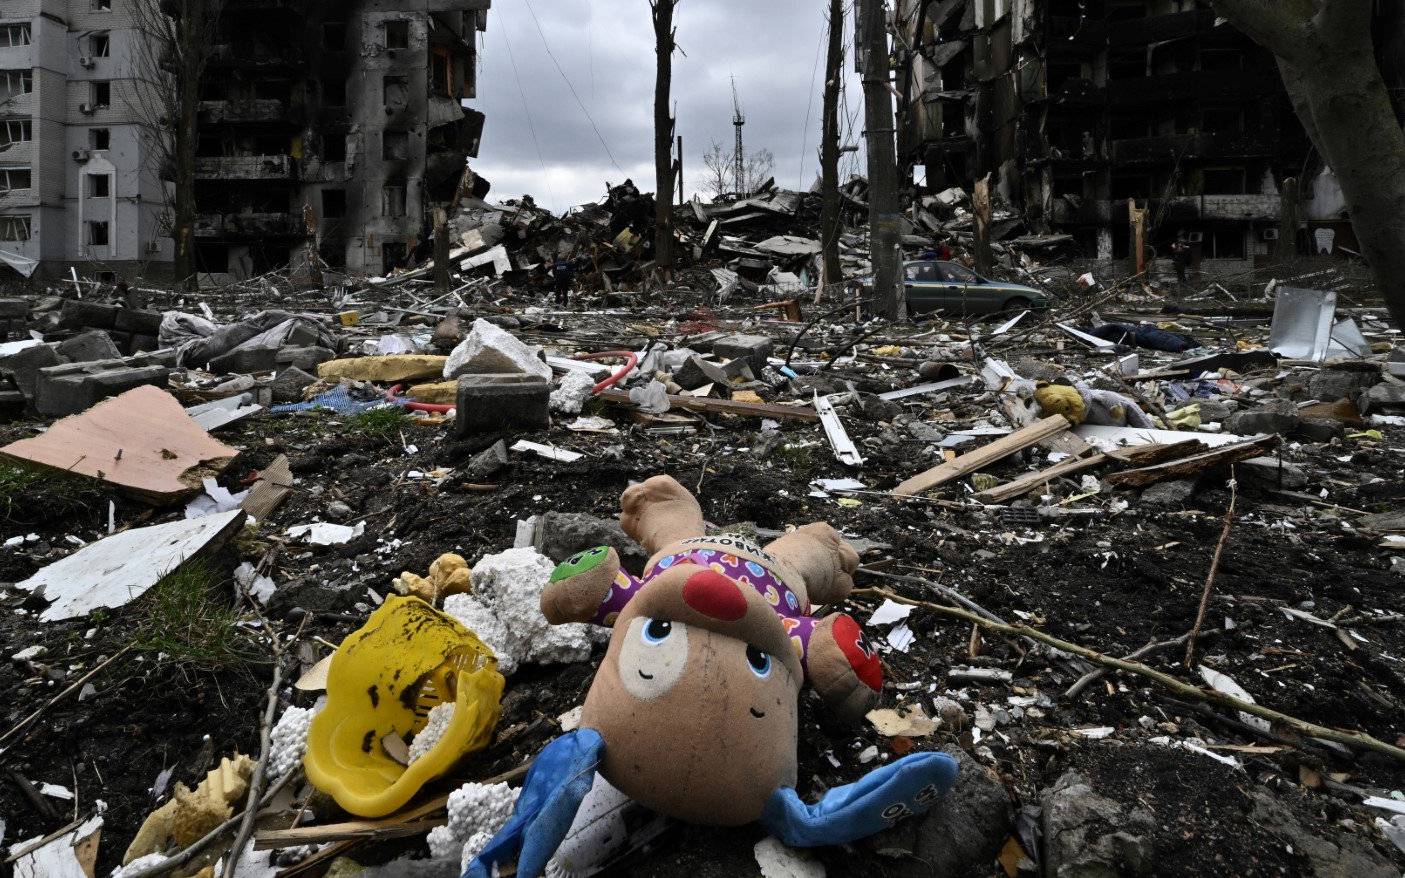 This photograph taken on April 6, 2022 shows a toy and personal belongings amongst rumbles  in front of a destroyed residential building, in the town of Borodianka, northwest of Kyiv. - The Russian retreat last week has left clues of the battle waged to keep a grip on Borodianka, just 50 kilometres (30 miles) north-west of the Ukrainian capital Kyiv. (Photo by Genya SAVILOV / AFP)